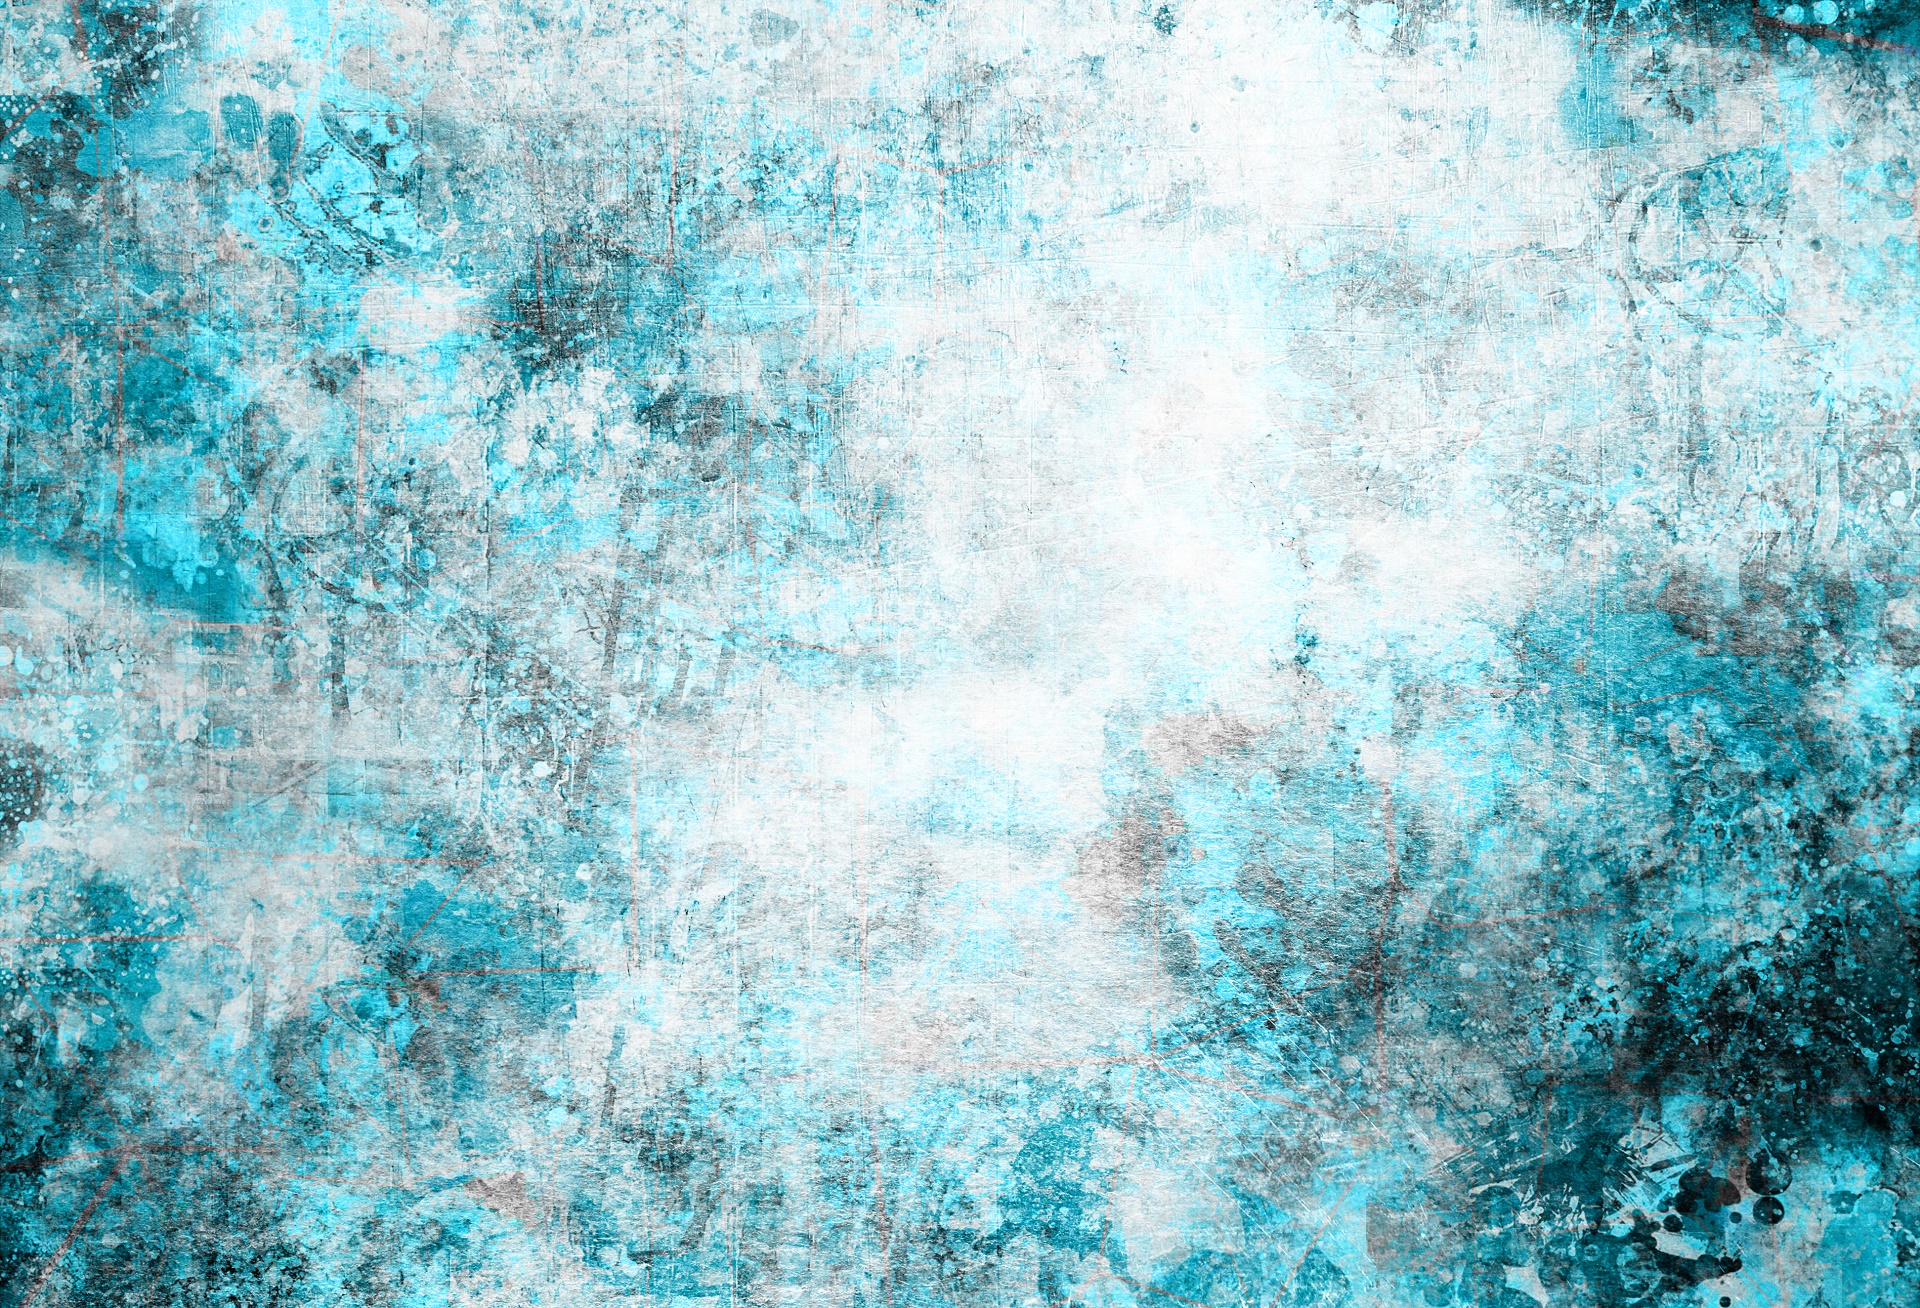 Abstract Grunge  HD Wallpaper Background  Image 1920x1308